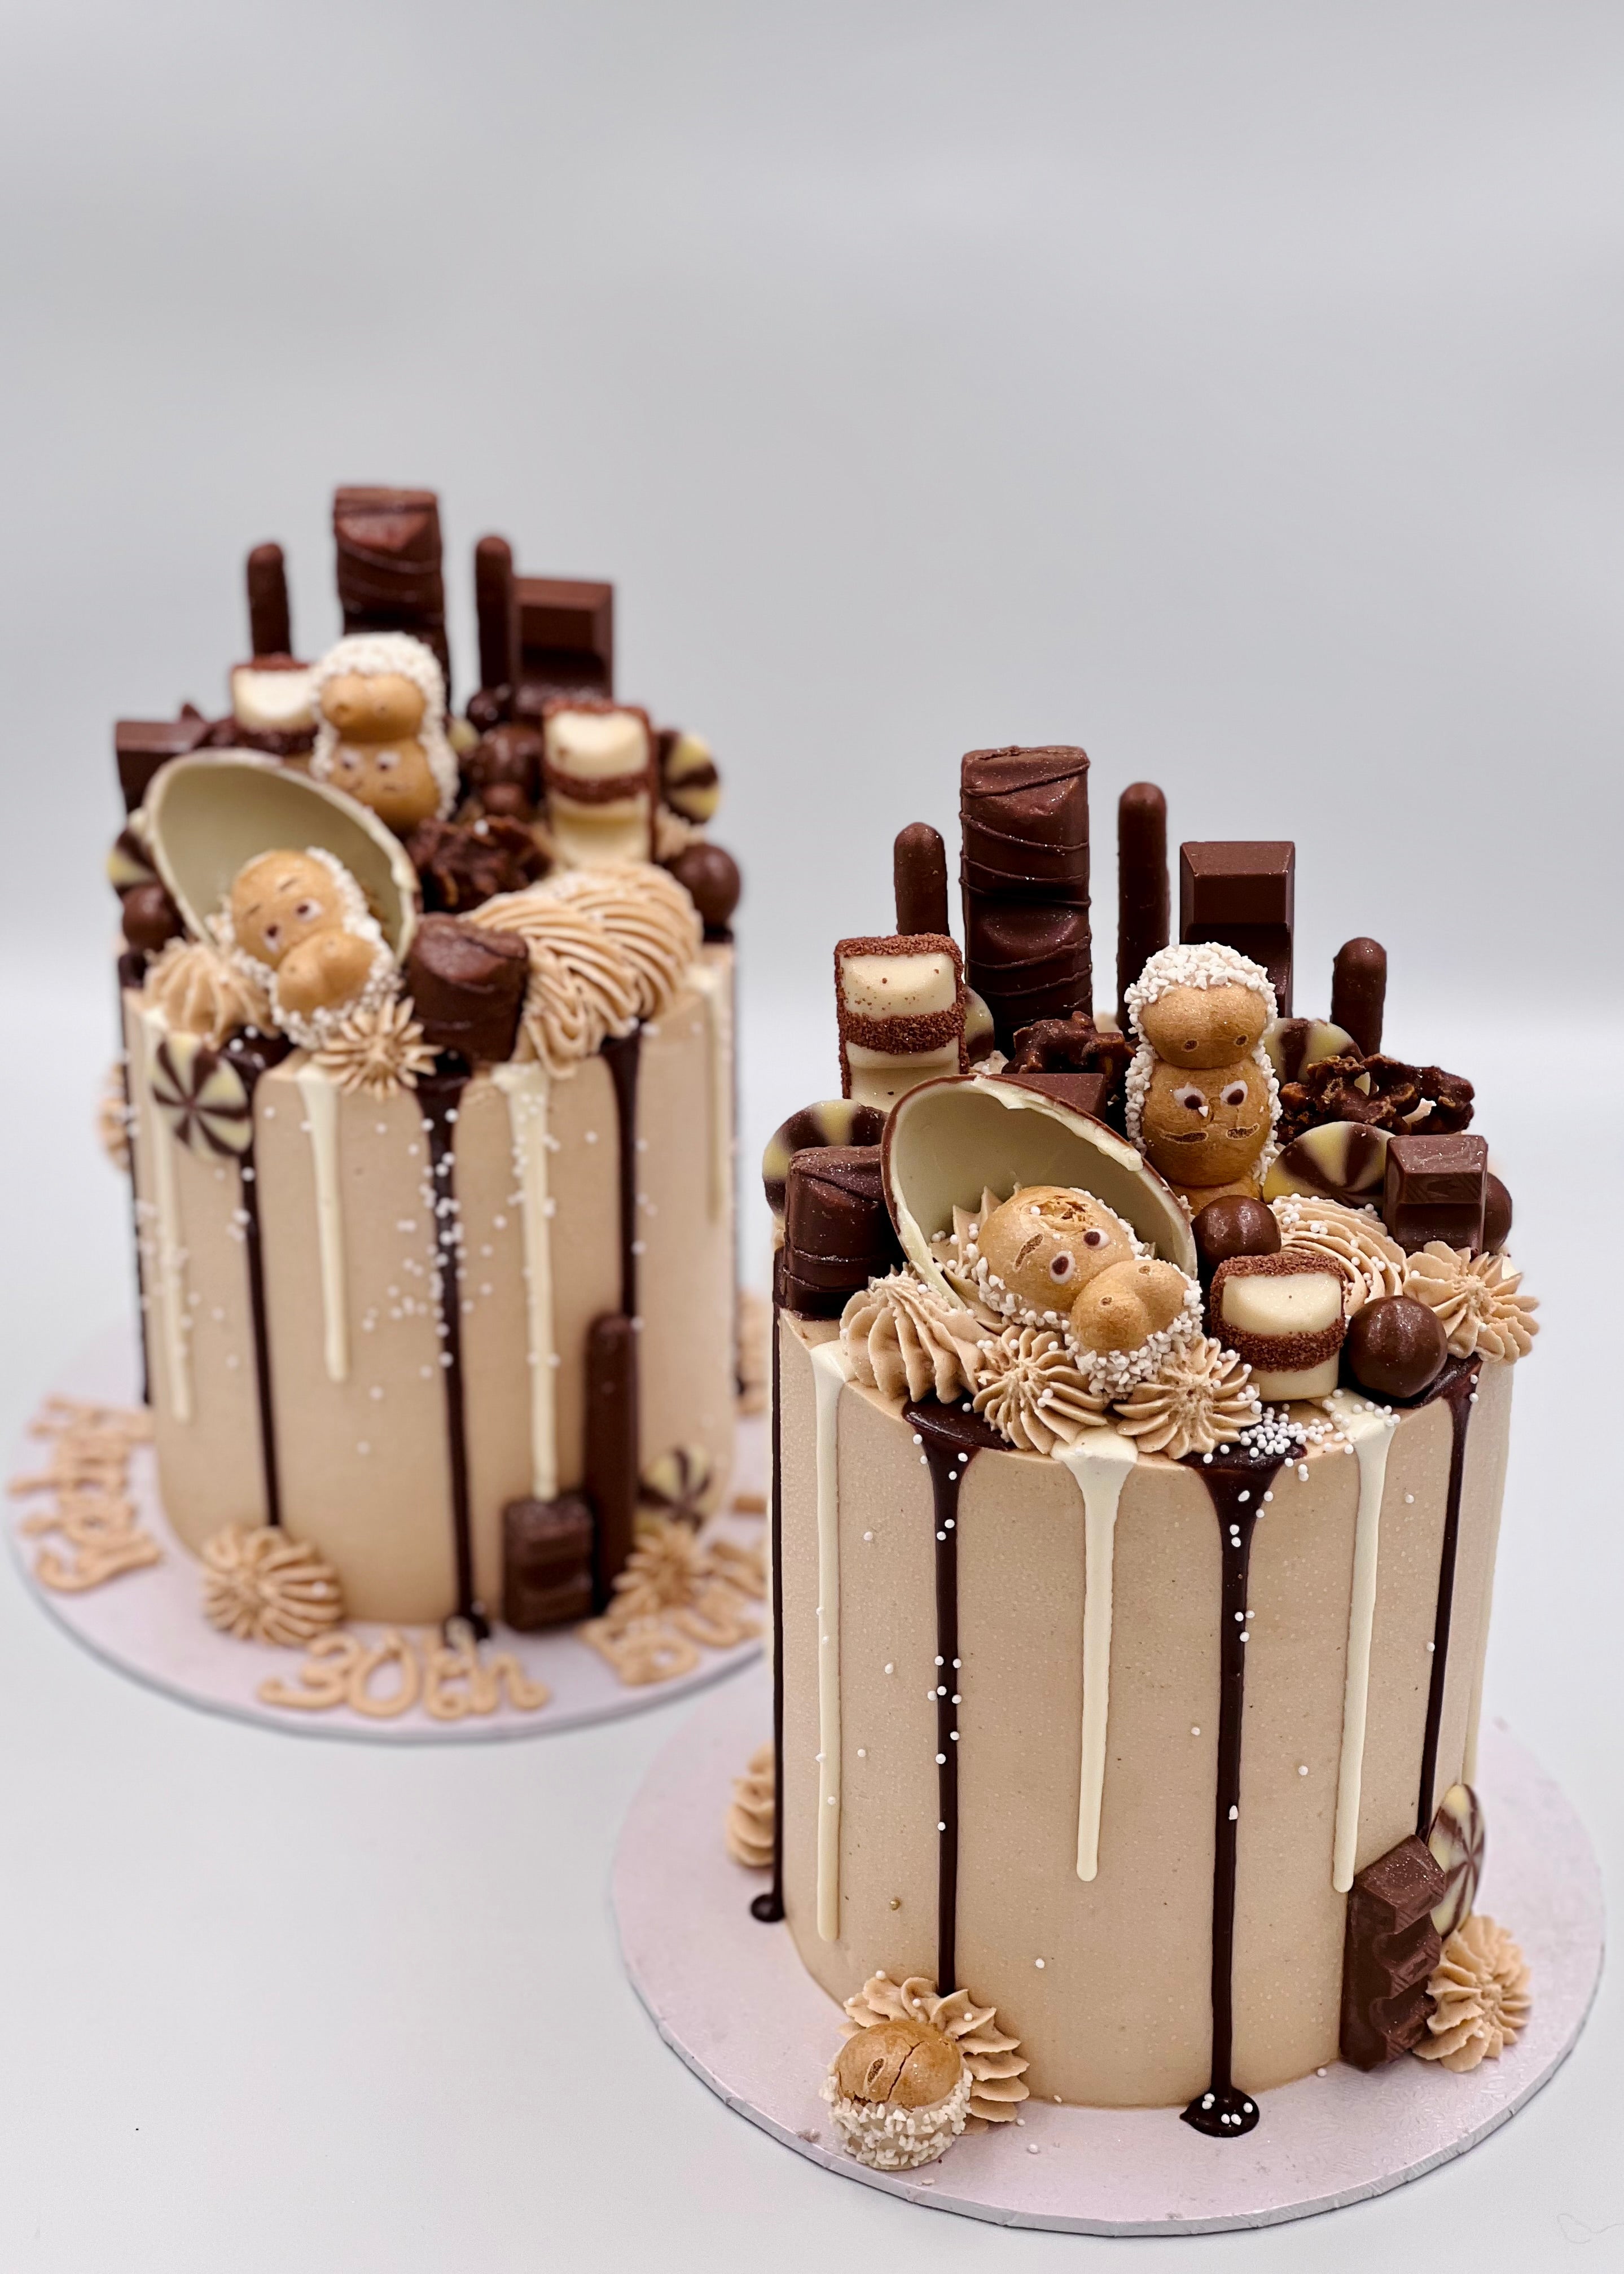 Mill Farm Cakes - 21st birthday cake for a kinder chocolate lover. Chocolate  cake, chocolate buttercream and a luscious chocolate ganache drip. 😋This  is definitely one for all the chocoholics 🍫 Pm